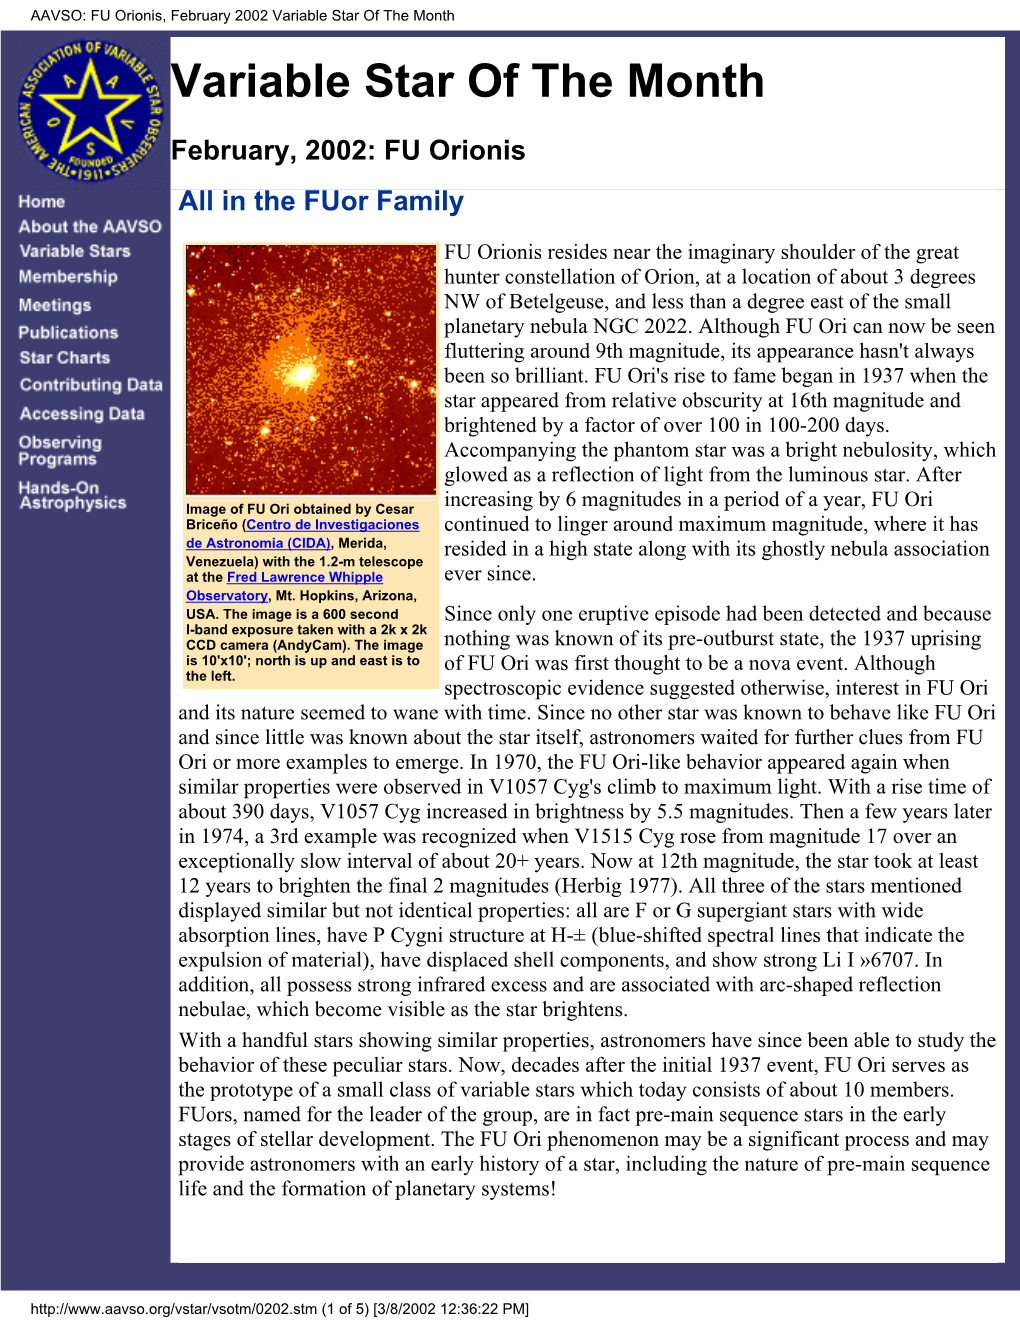 FU Orionis, February 2002 Variable Star of the Month Variable Star of the Month